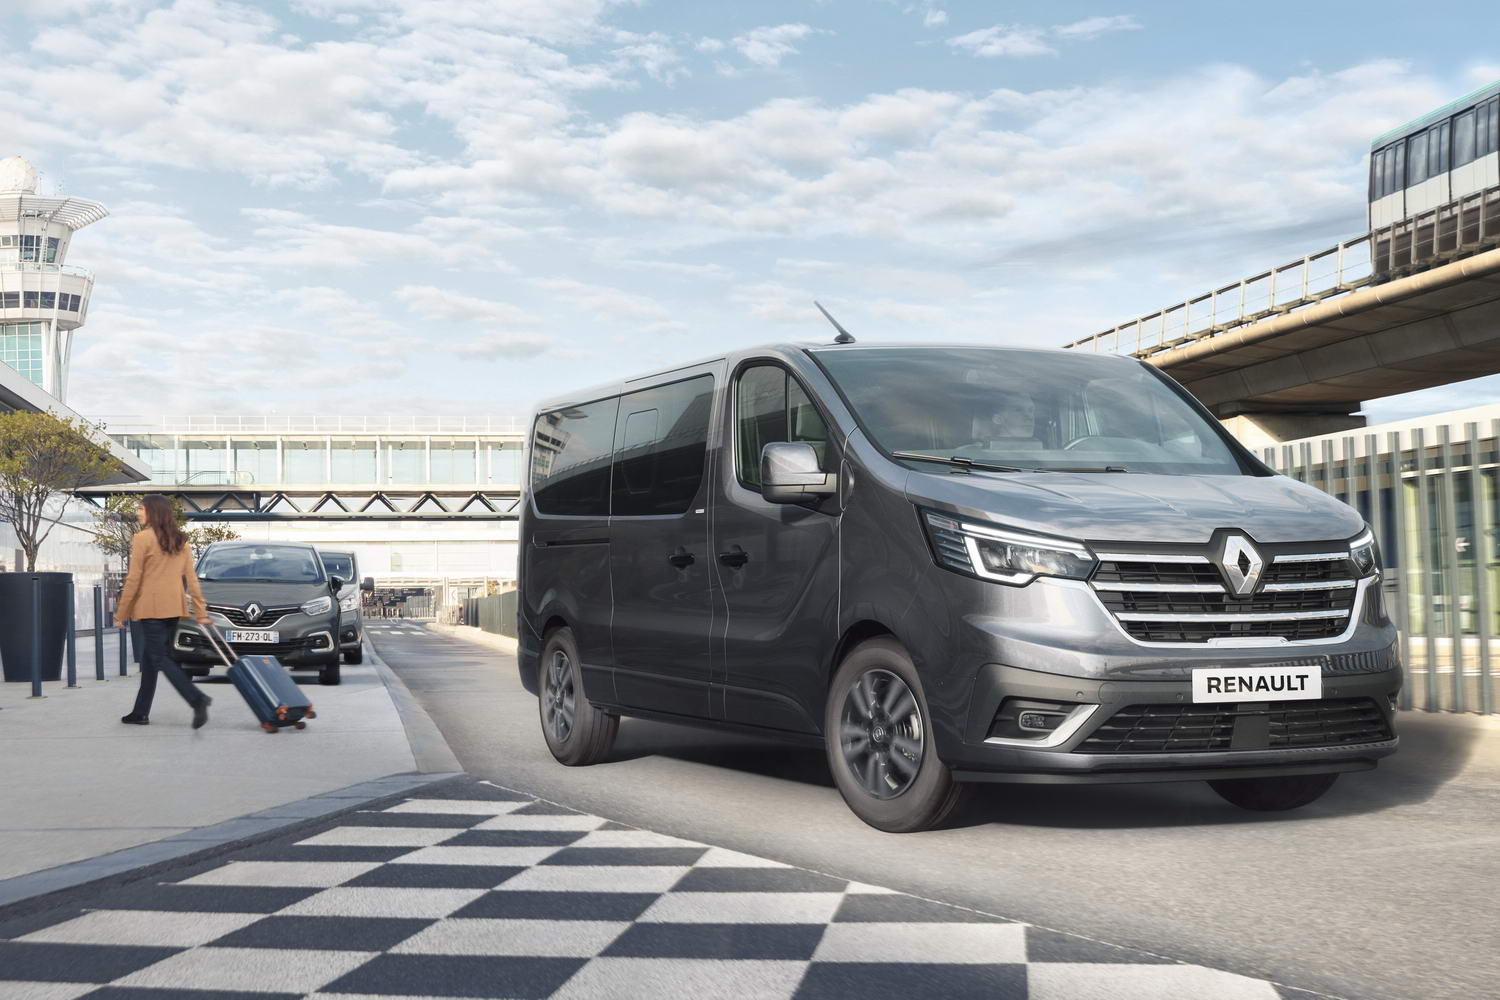 The Renault Trafic Passenger SpaceClass.